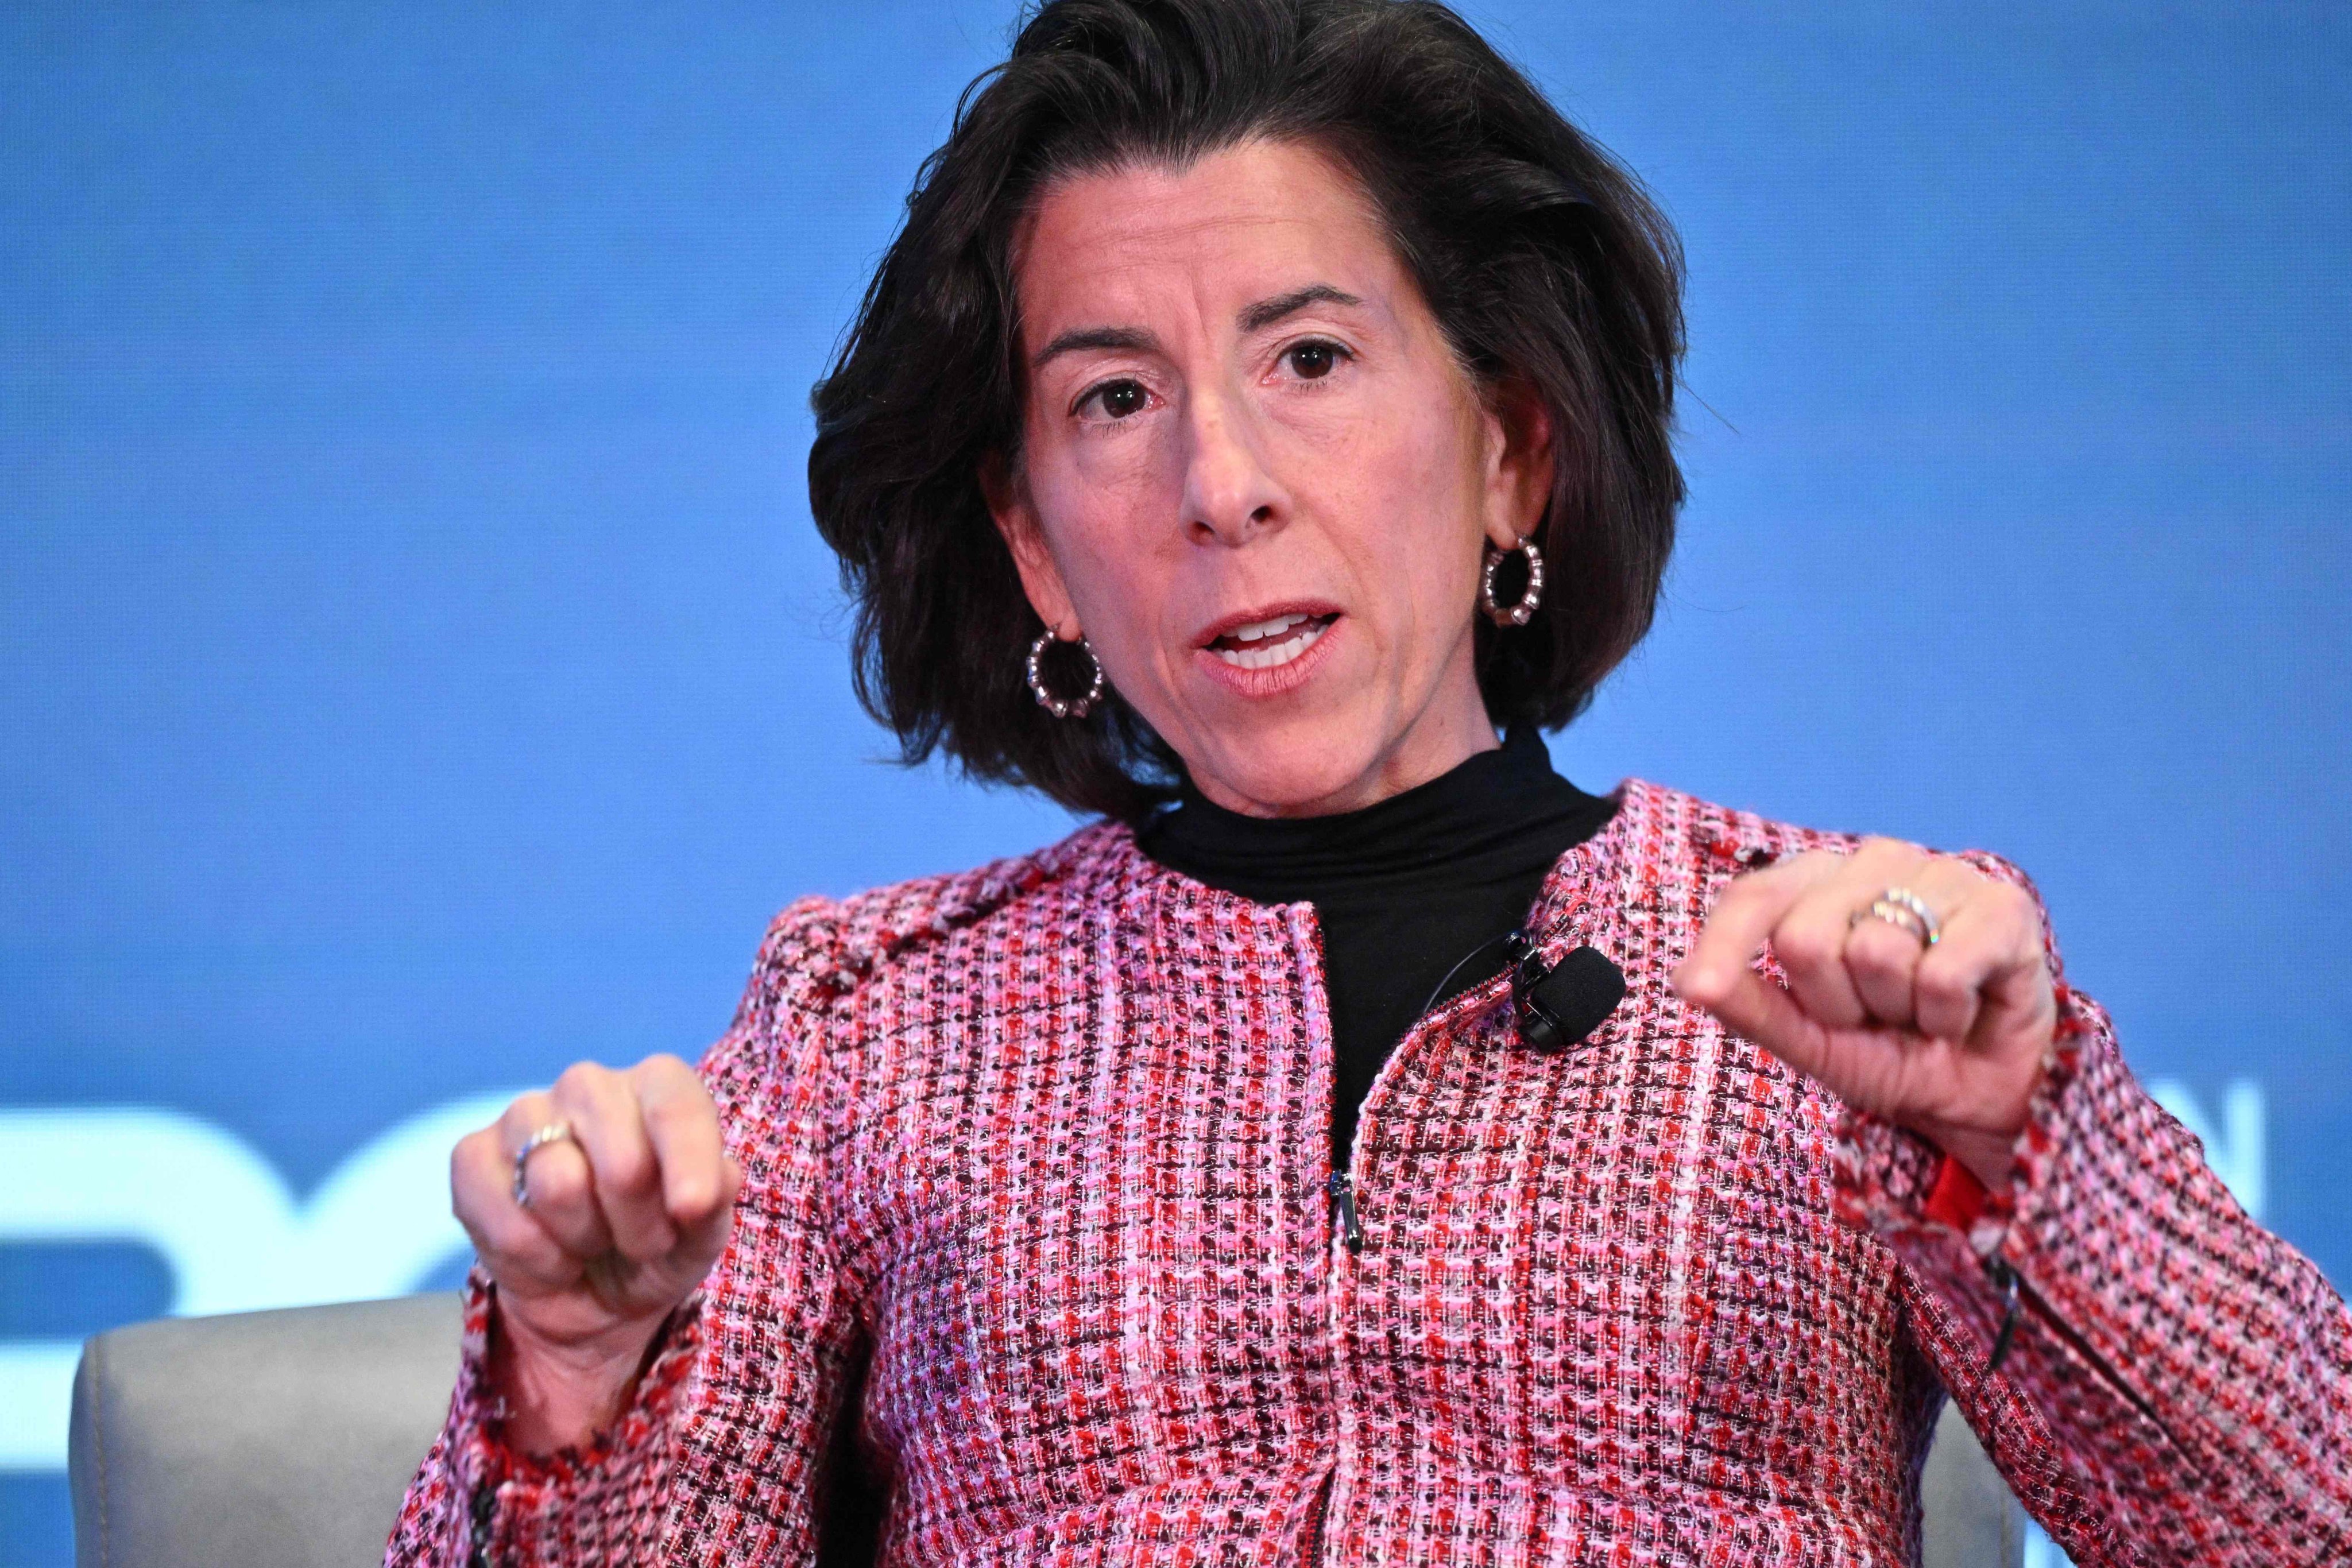 Gina Raimondo, the US commerce secretary, has identified artificial intelligence, or AI, as a focal point of American government efforts to guard national security. Photo: AFP